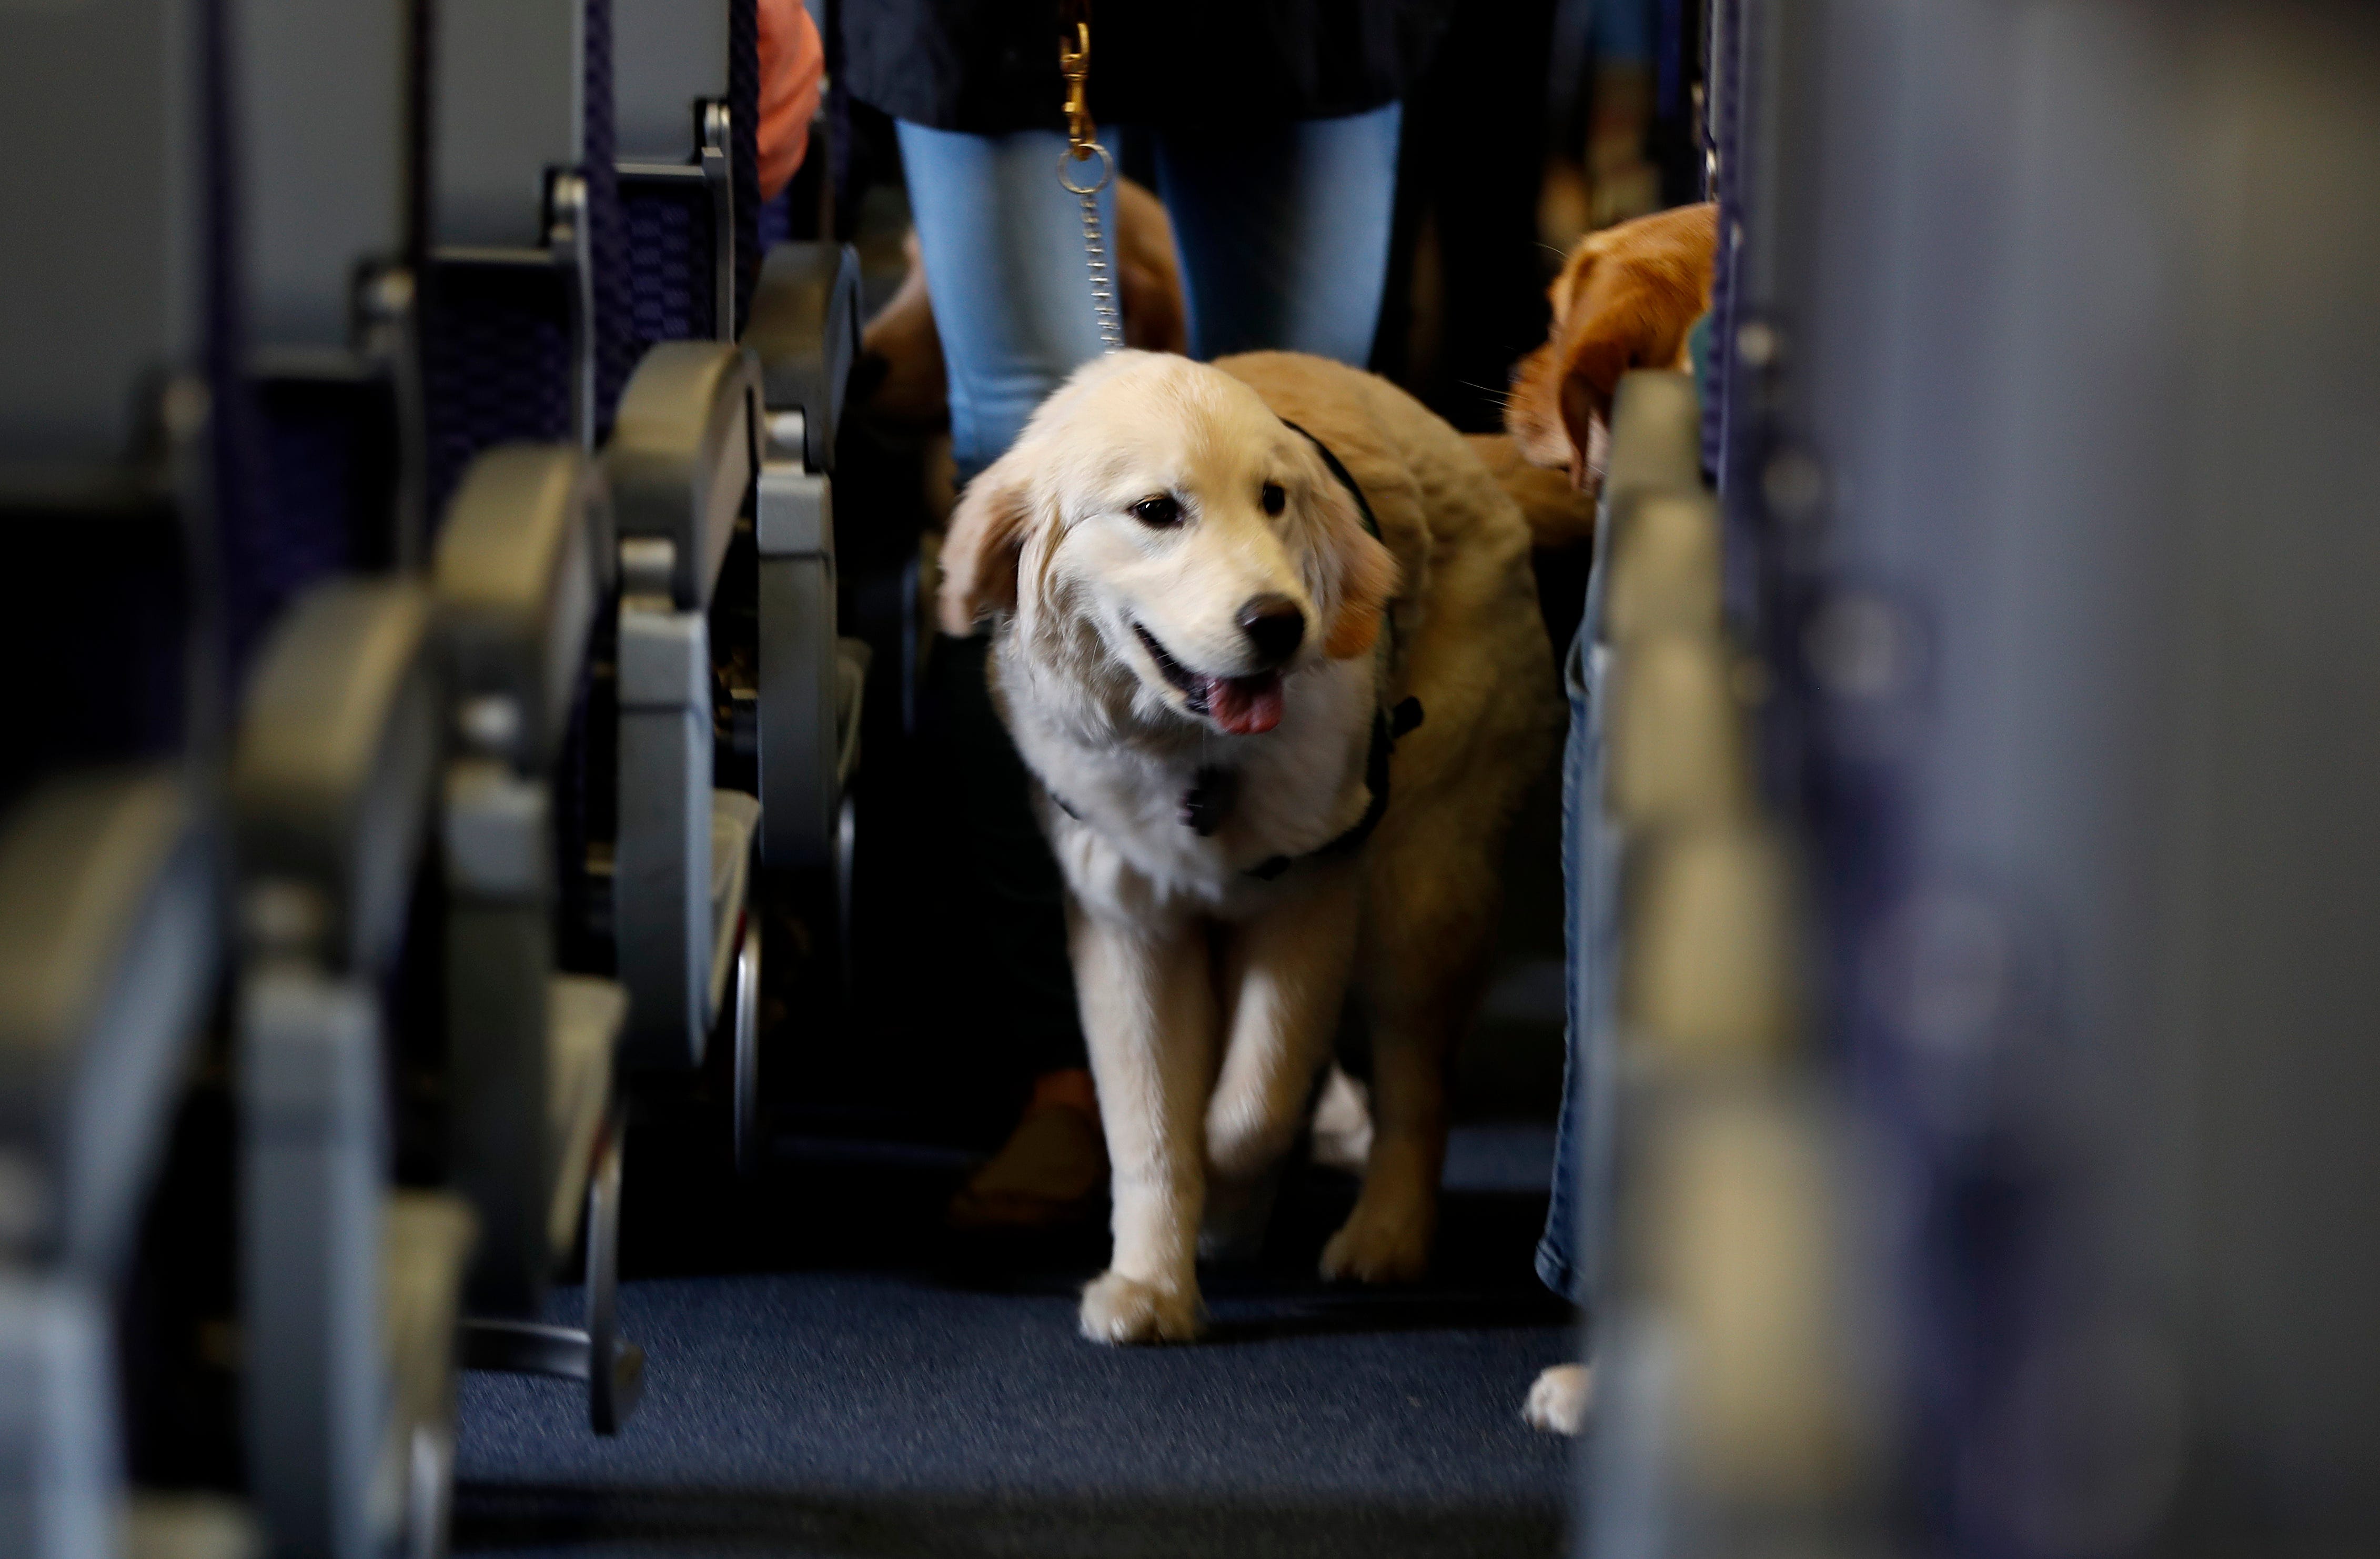 frontier airlines pets as carry on